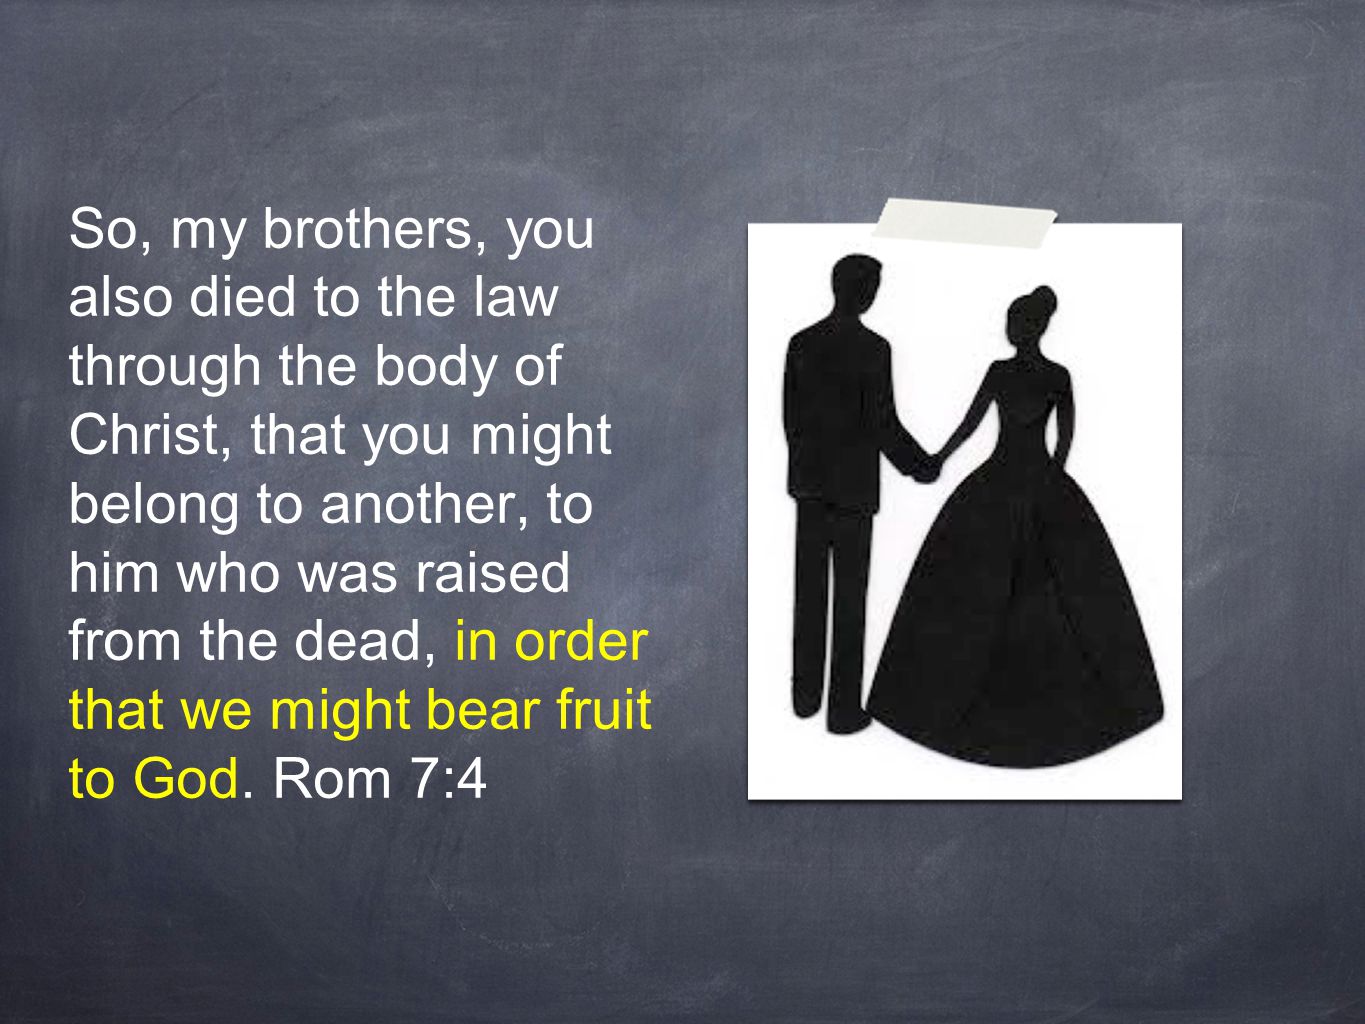 So, my brothers, you also died to the law through the body of Christ, that you might belong to another, to him who was raised from the dead, in order that we might bear fruit to God.